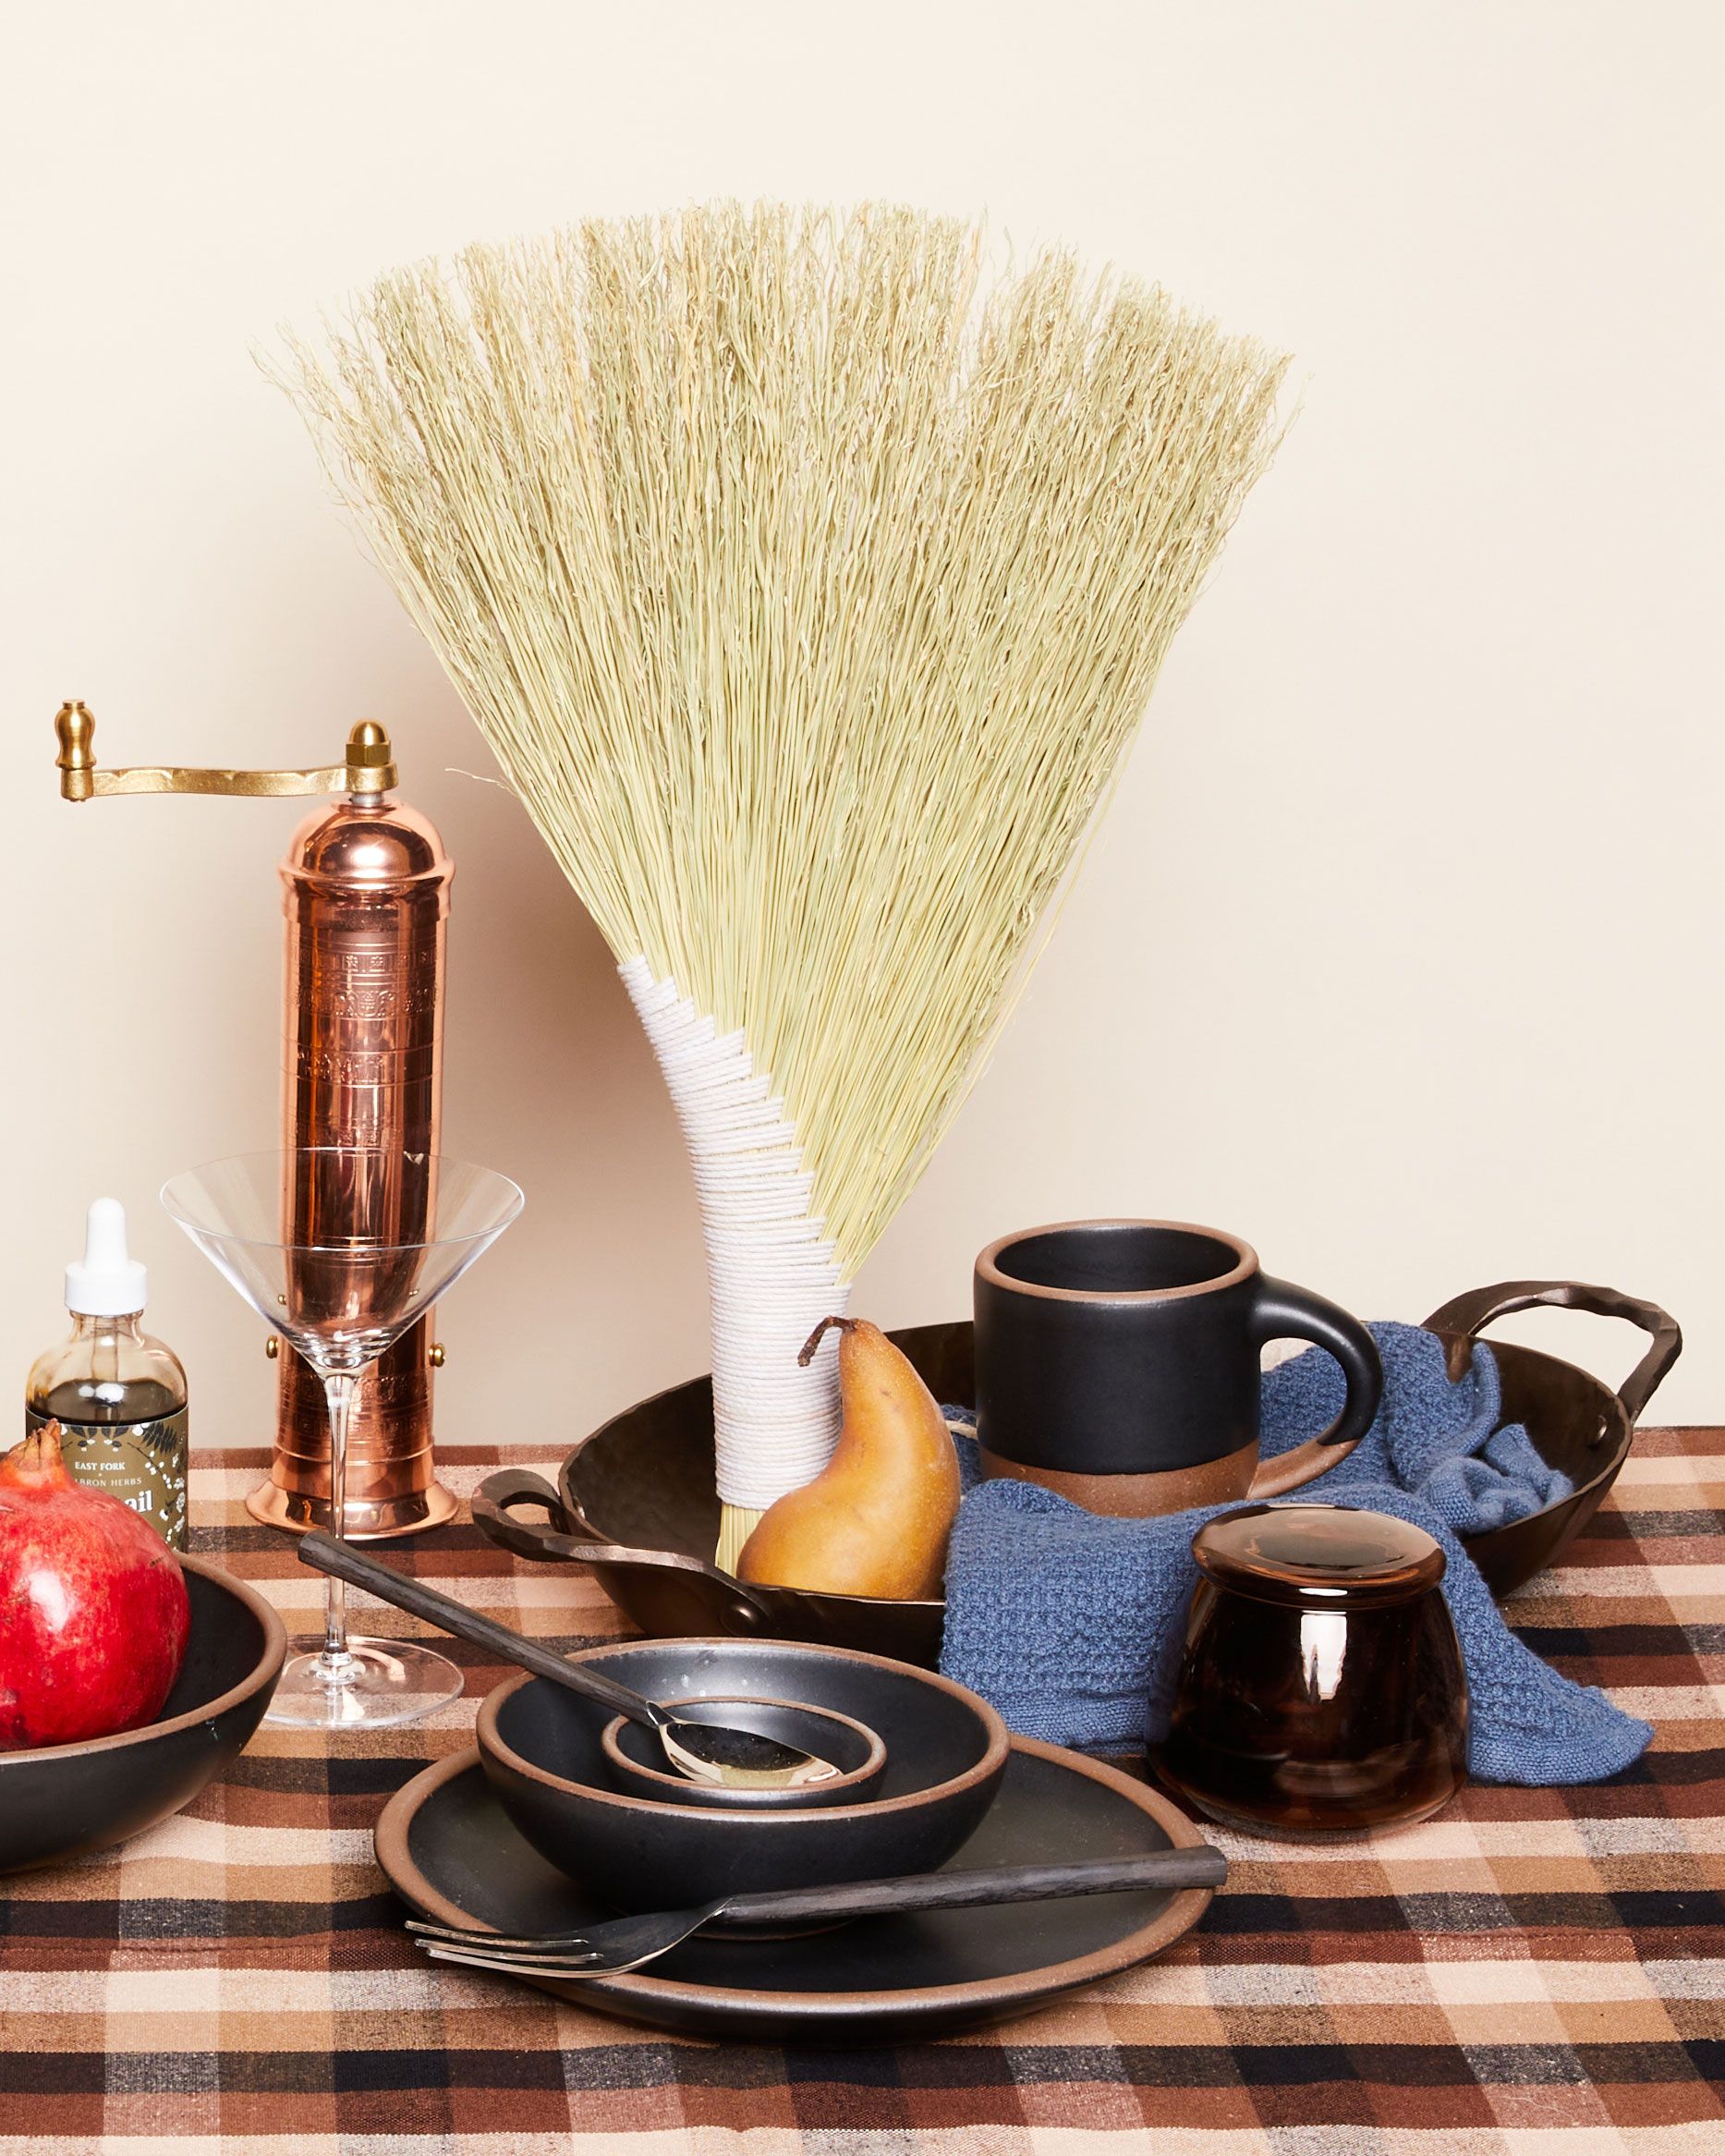 A table with a gingham tablecloth covered in black pottery, a pepper grinder, a martini glass, a butter keeper, a hand broom, martini bitters, and fruits. 